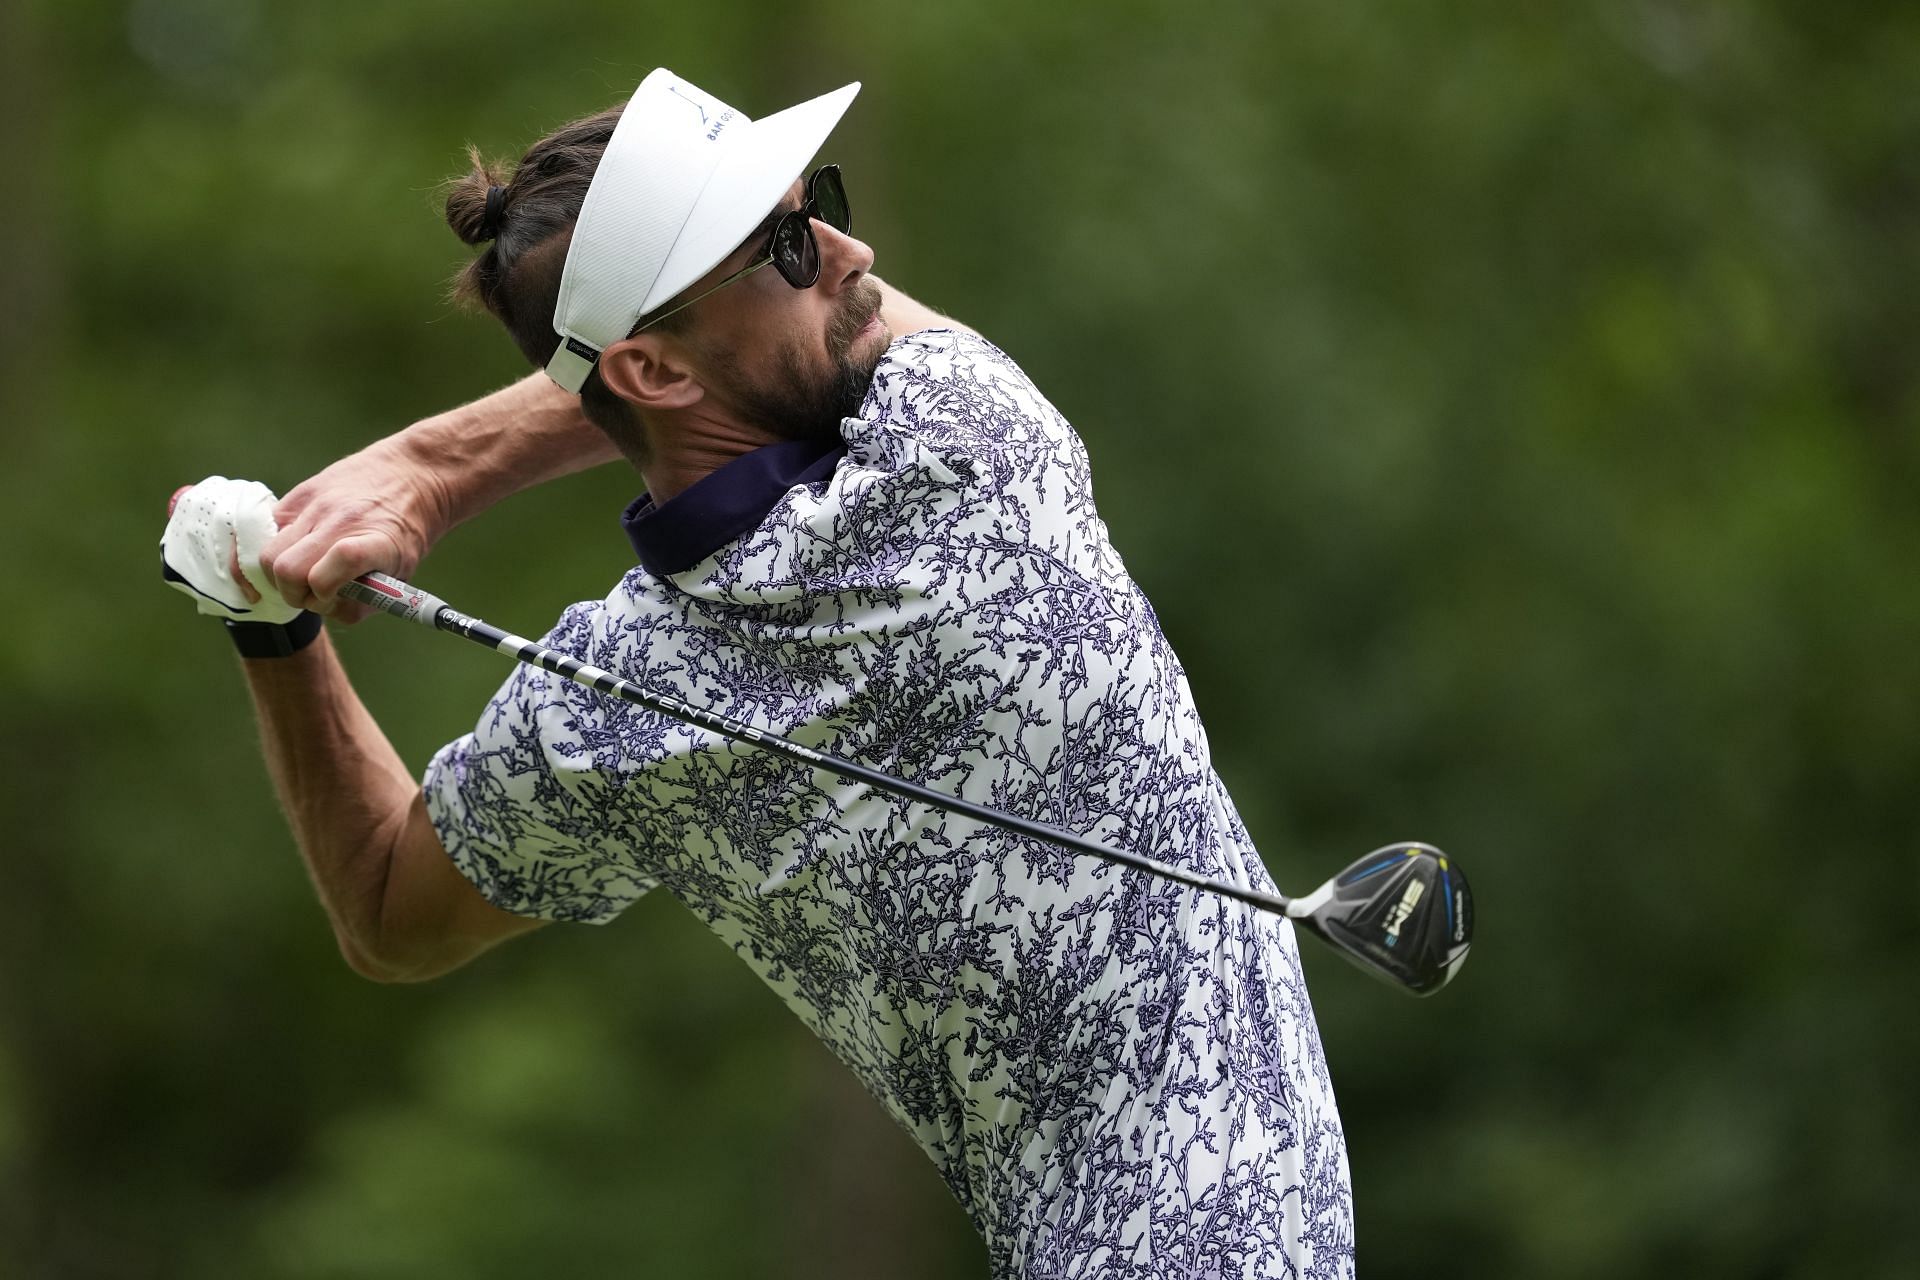 Michael Phelps took up golfing after initially retiring in 2012.